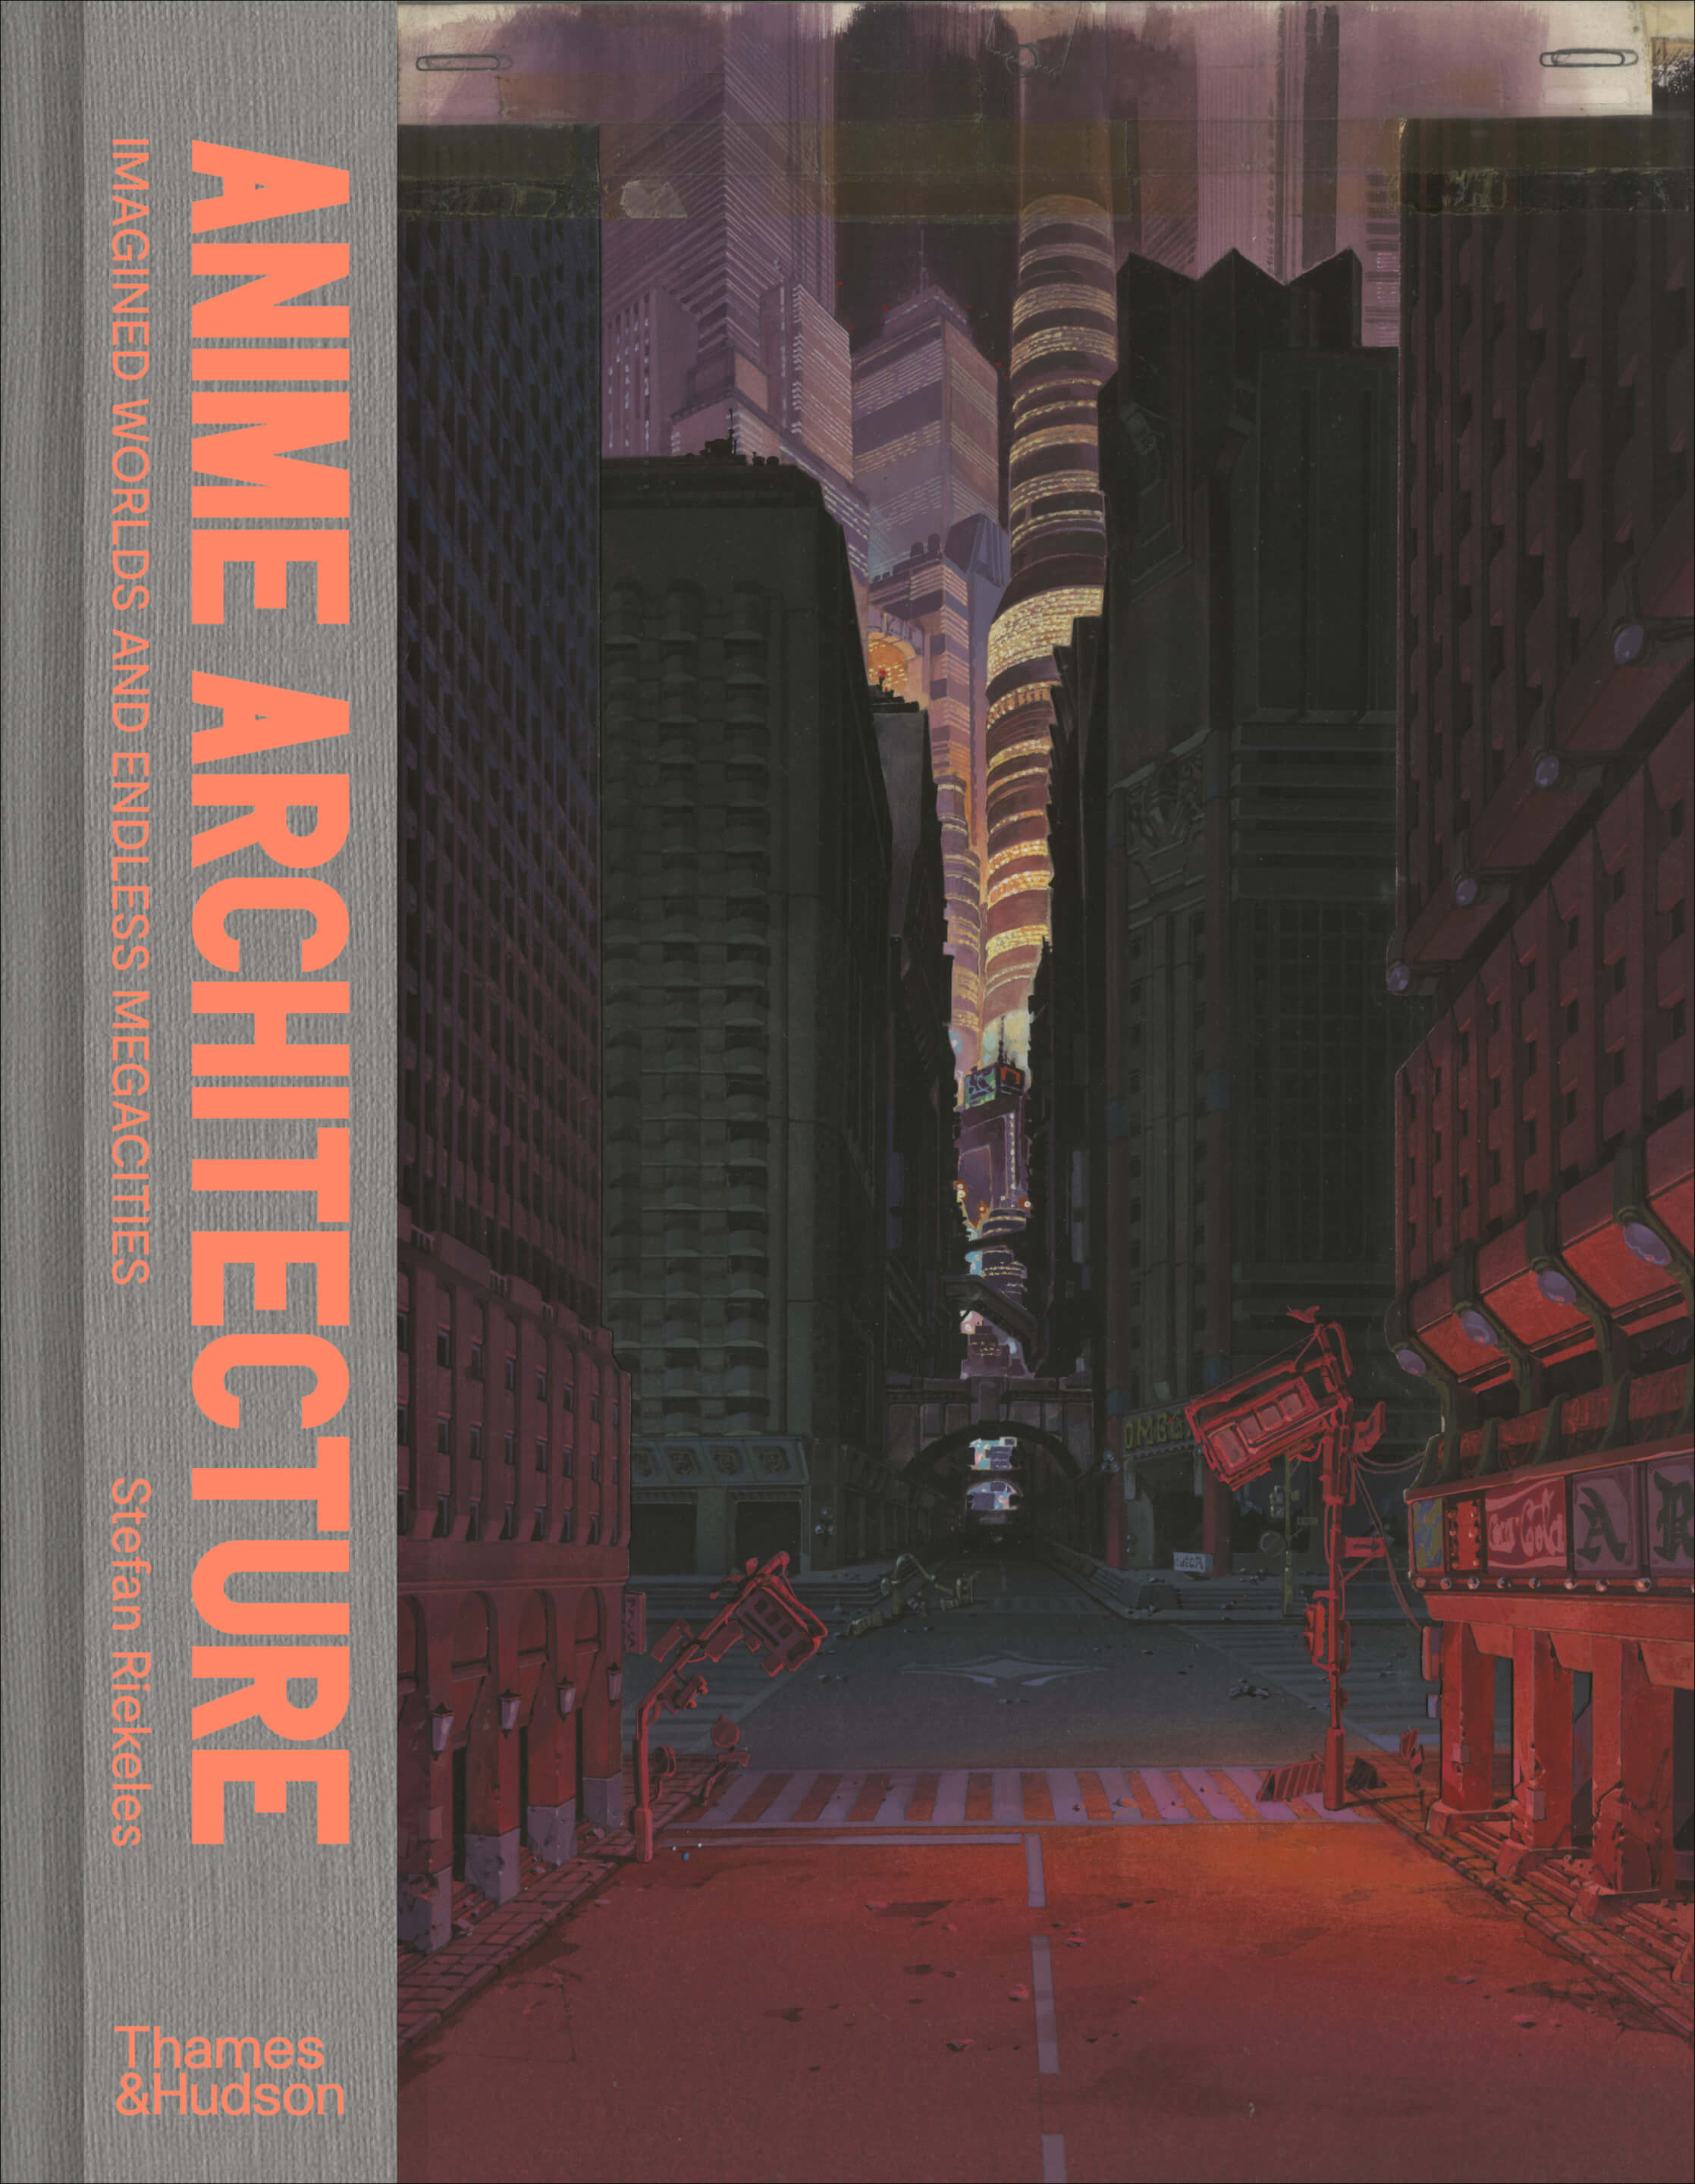 cover of a book that says anime architecture in orange lettering